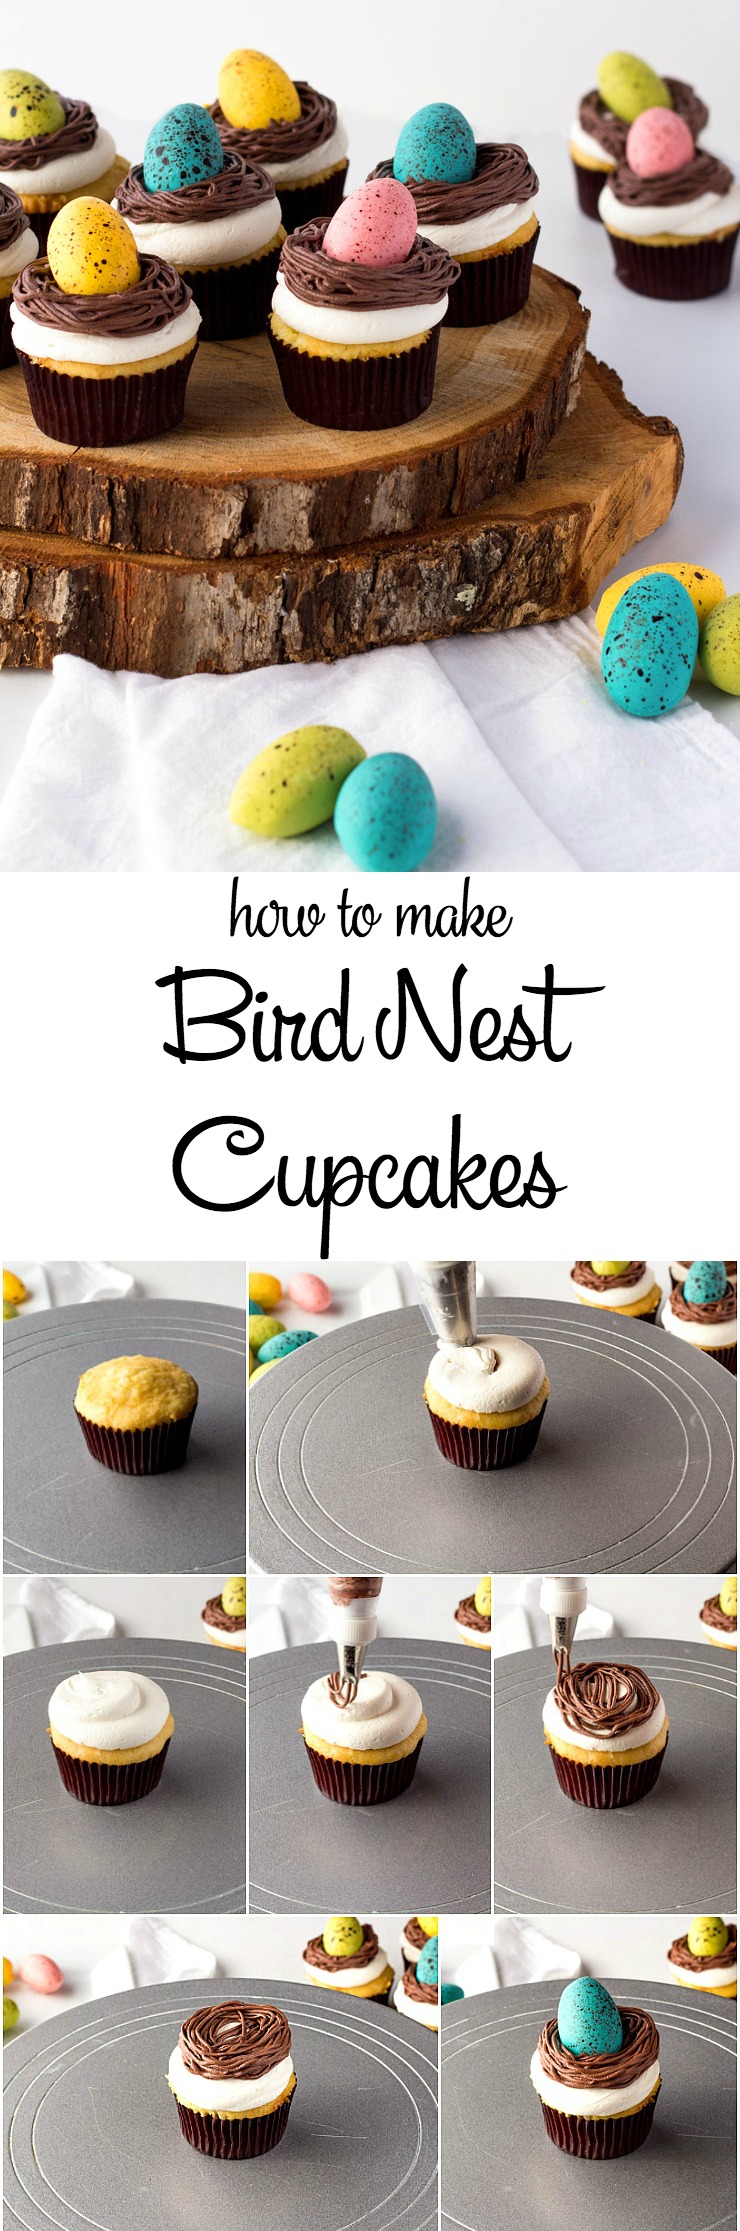 How to Make Simple Bird Nest Cupcakes with Chocolate Robin Eggs | The Bearfoot Baker